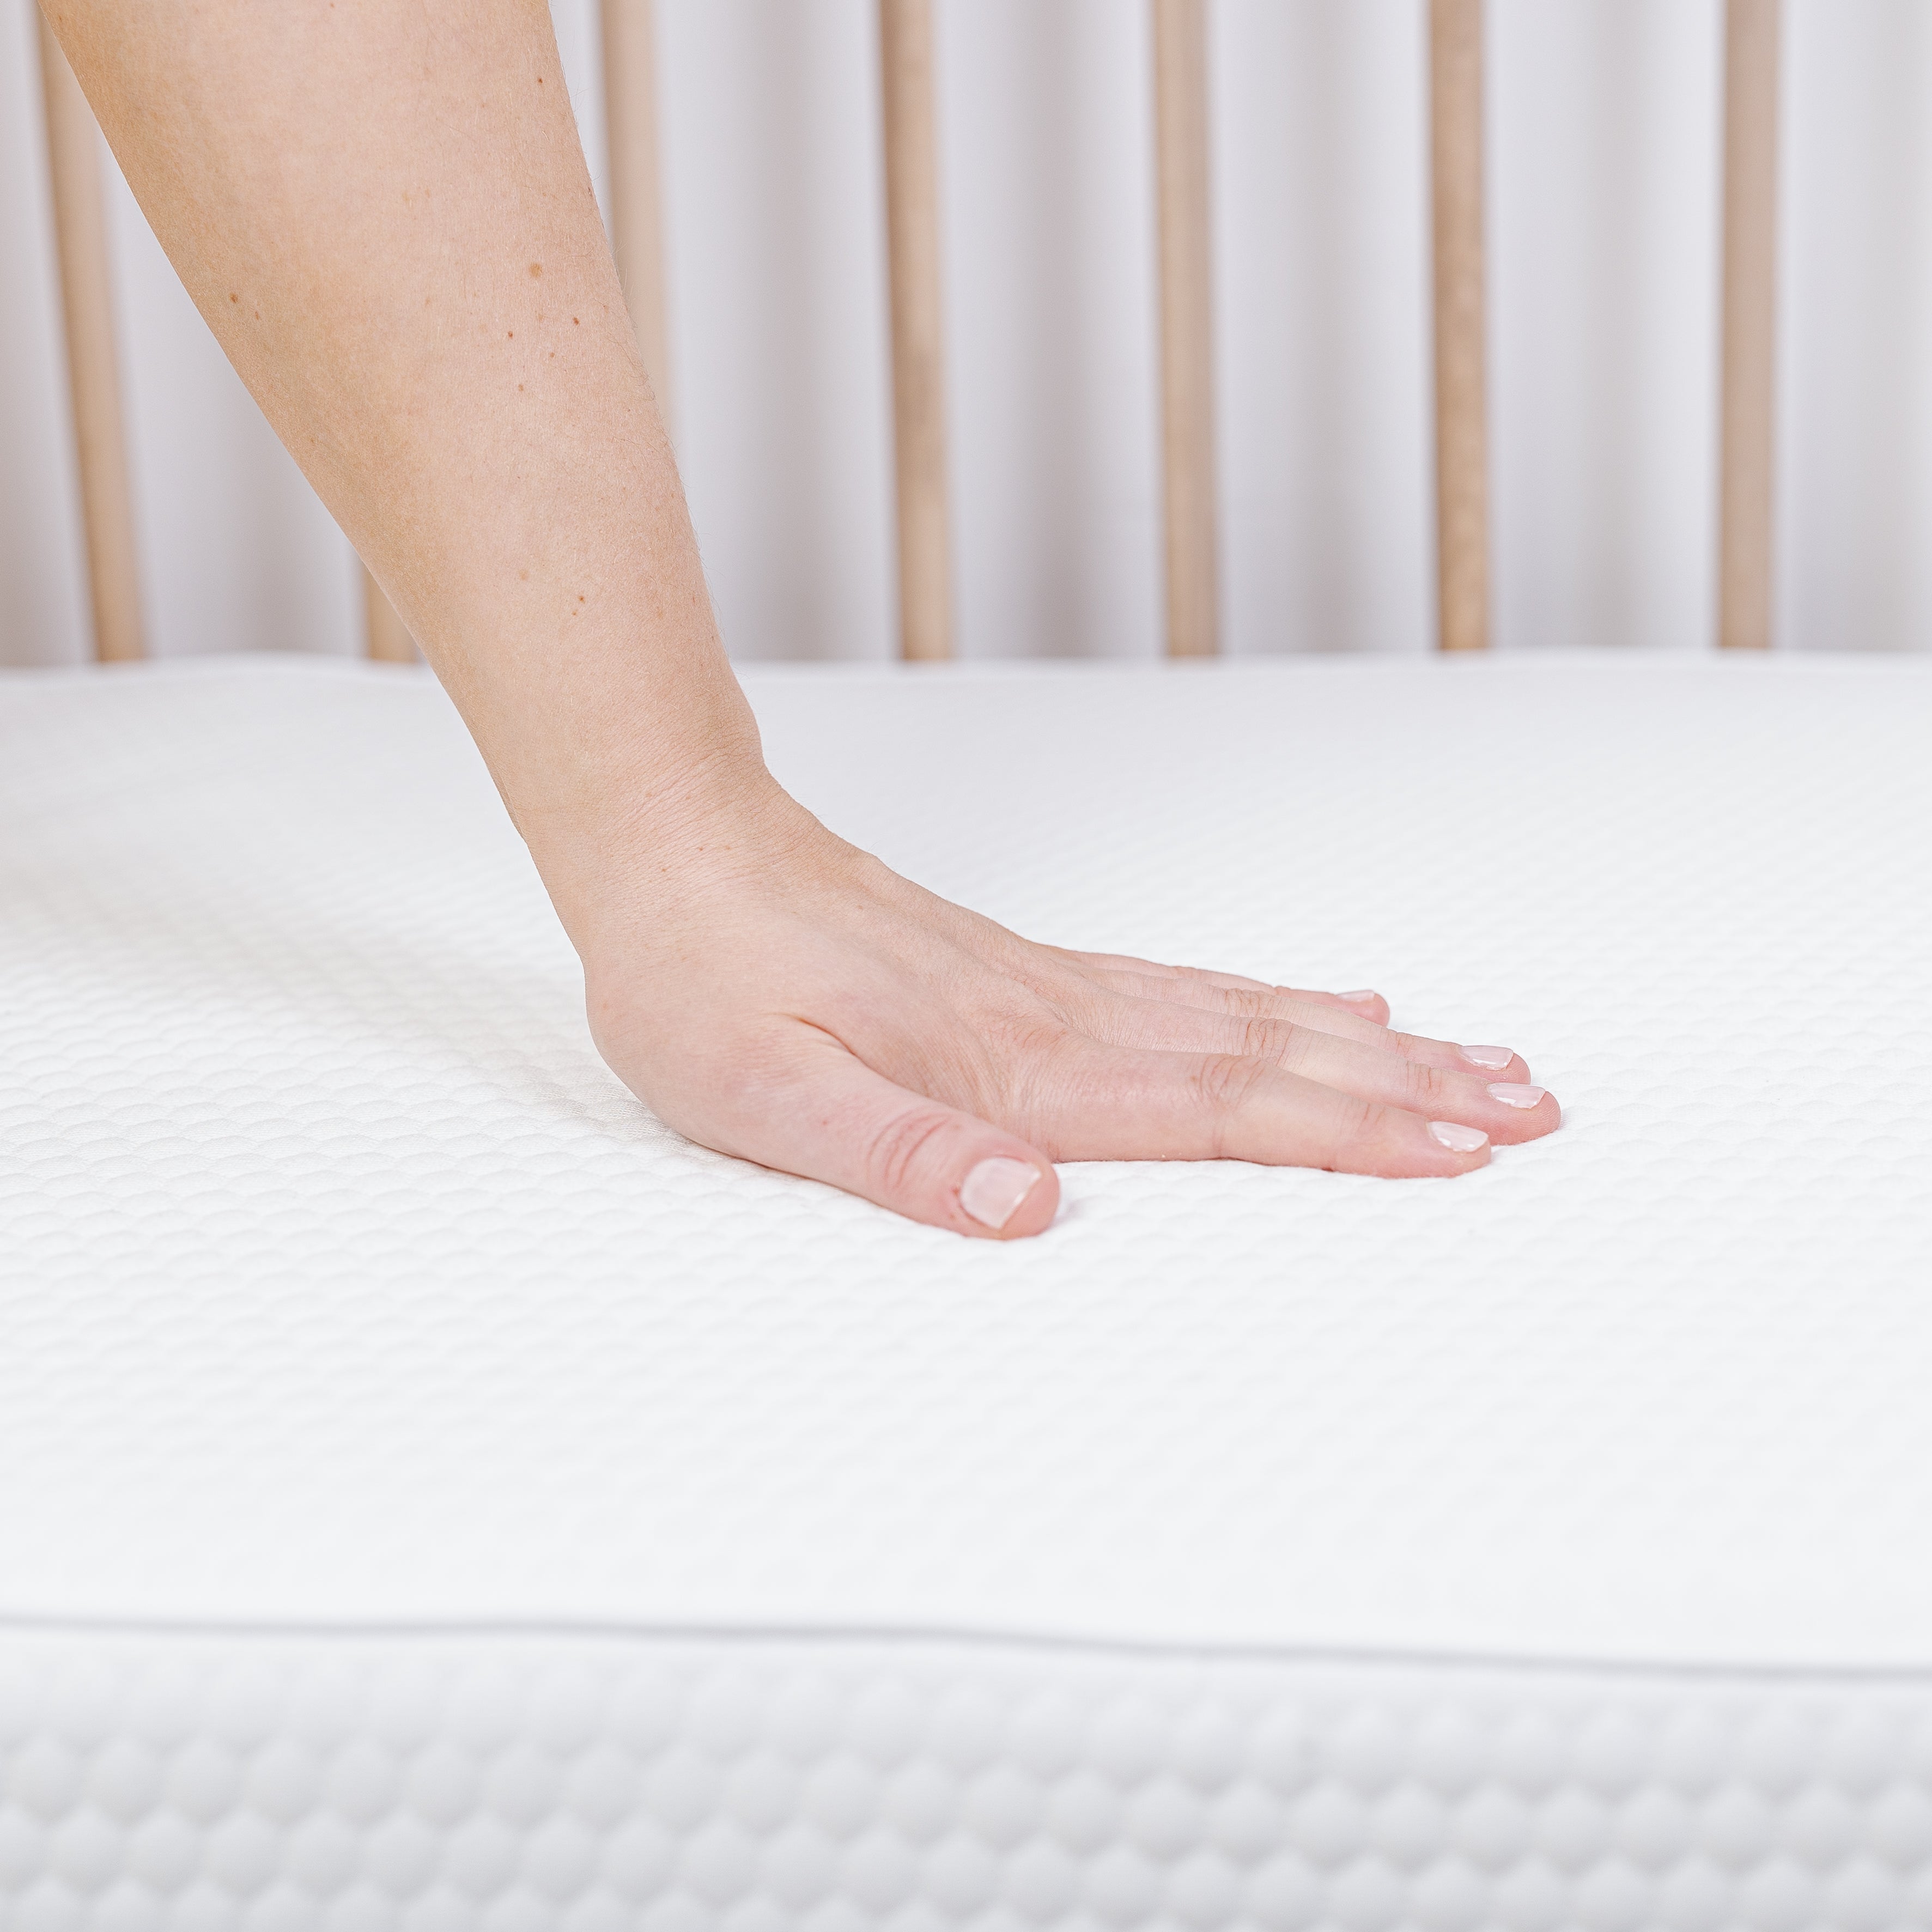 Tiny Dreamer Plus™  - Luxury Pocket Sprung Cot Bed Mattress (140 x 70cm) - The Tiny Bed Company™